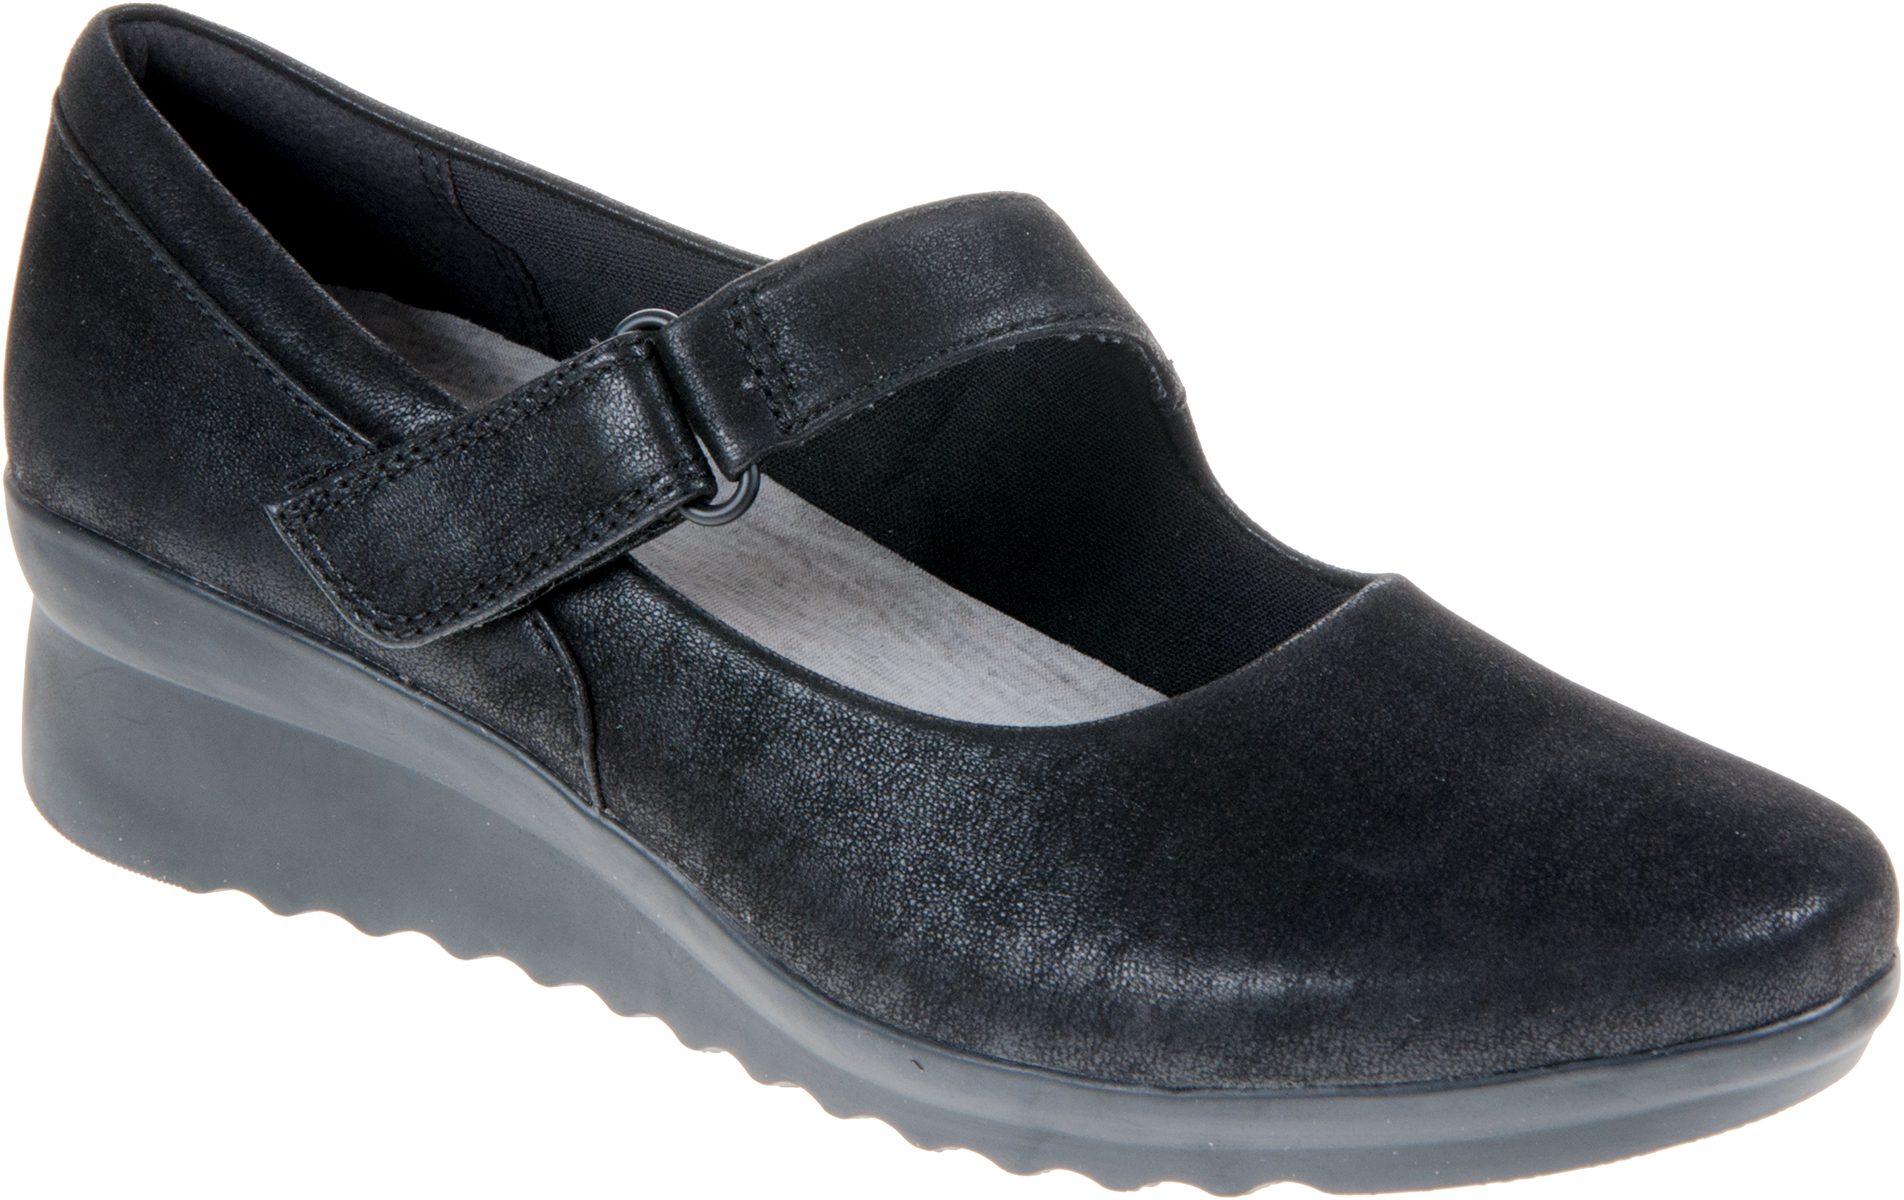 Clarks Caddell Yale Black 26129378 - Ballerina Shoes - Humphries Shoes